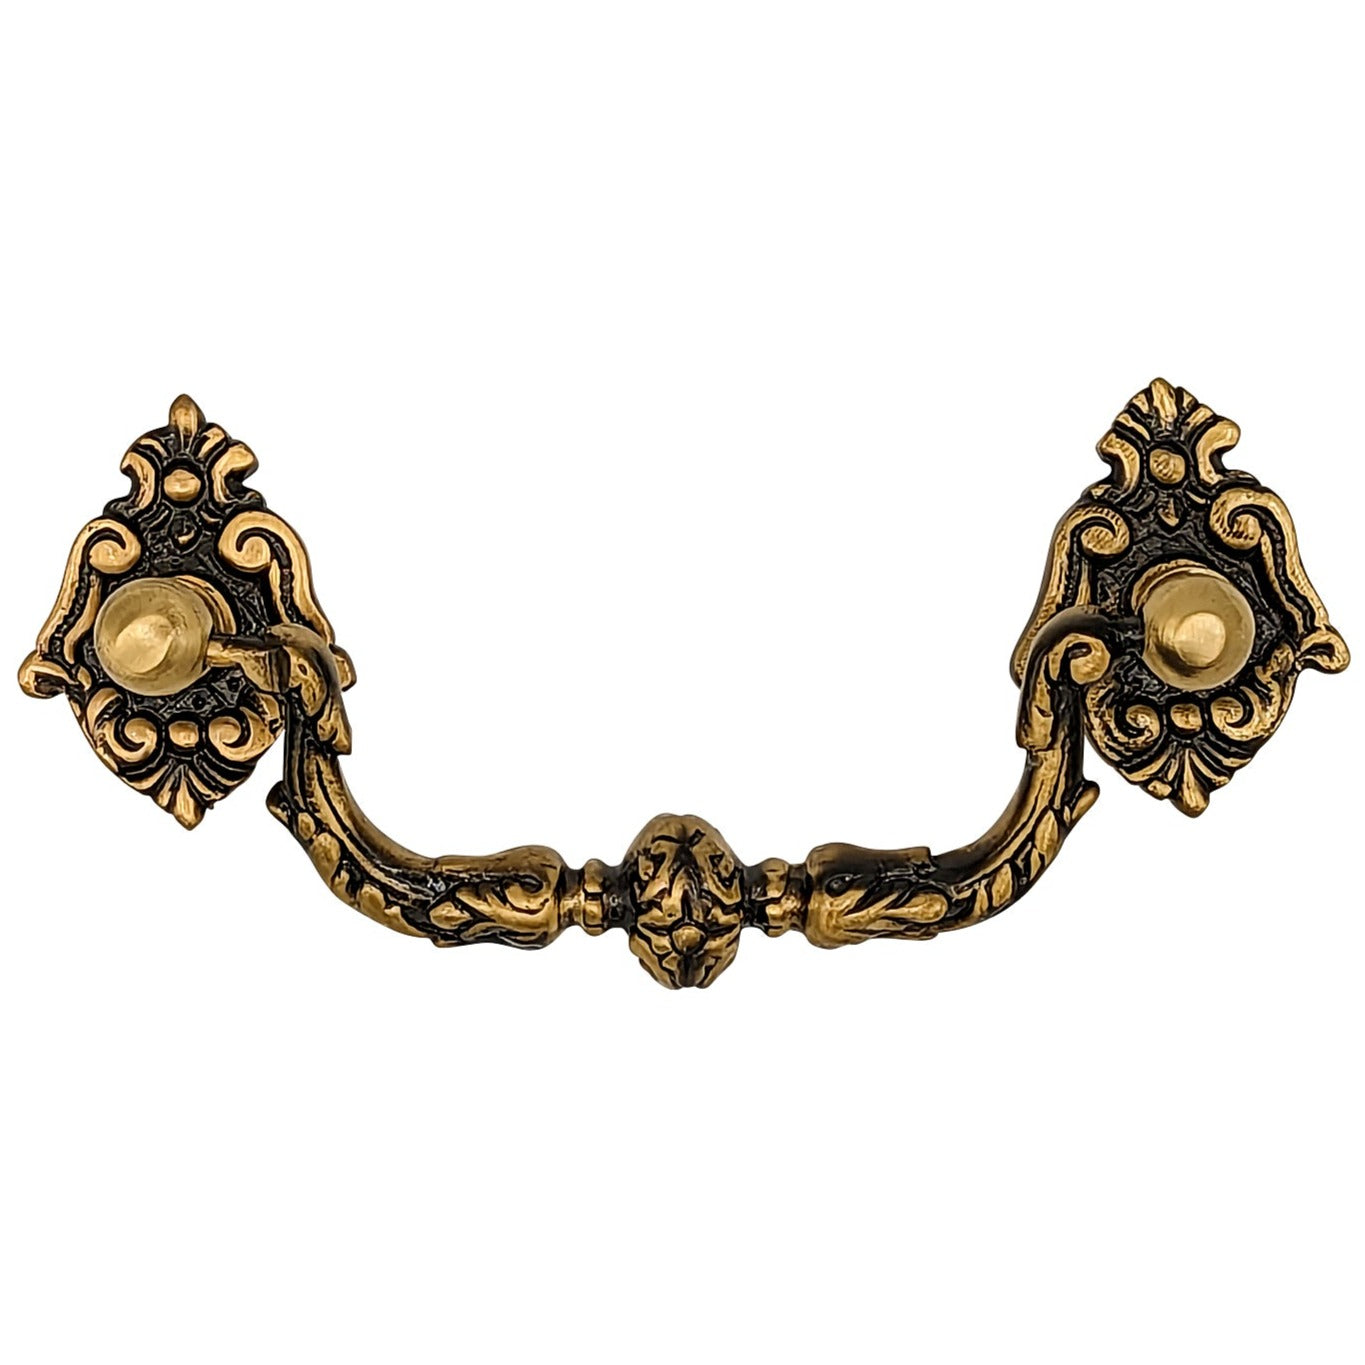 5 Inch Solid Brass Ornate Victorian Curve Bail Handle